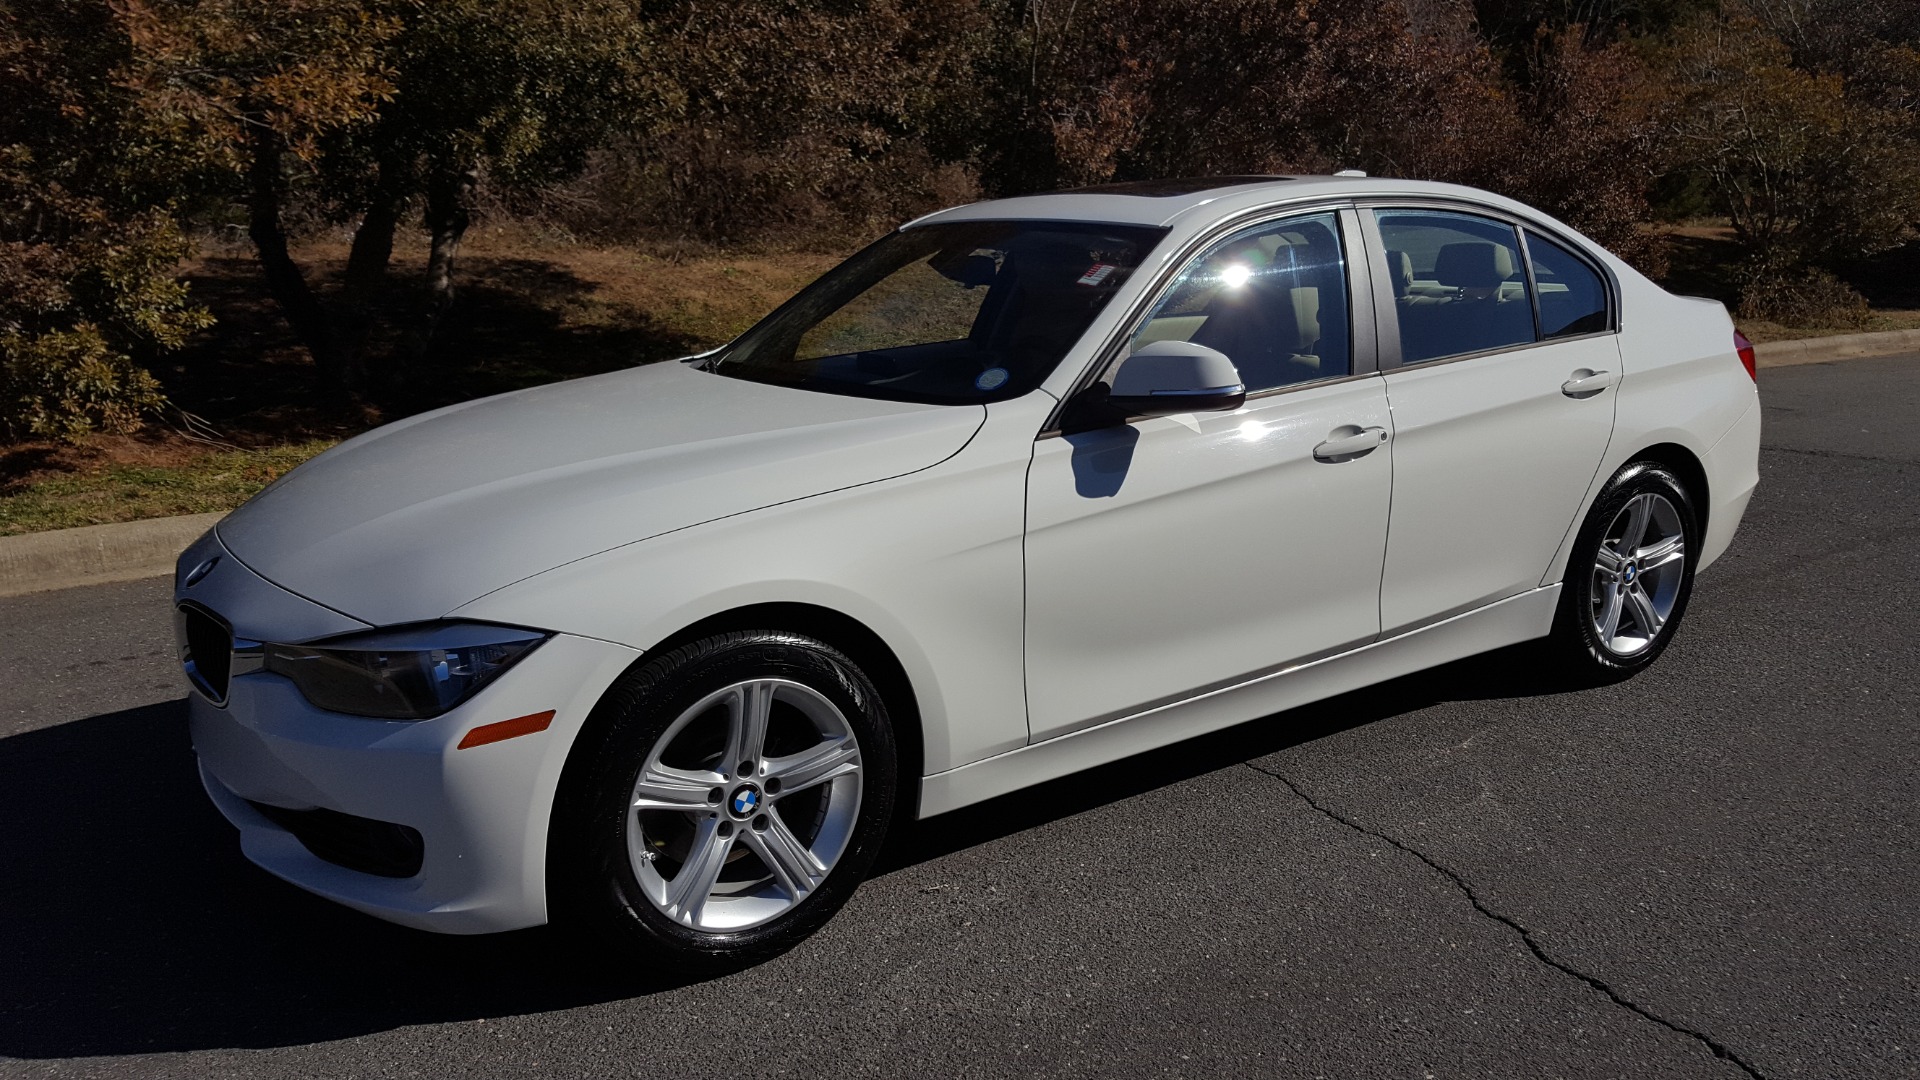 Used 2015 BMW 3 SERIES 328I SEDAN / SUNROOF / LEATHER / 8-SPEED AUTO / RWD for sale Sold at Formula Imports in Charlotte NC 28227 1